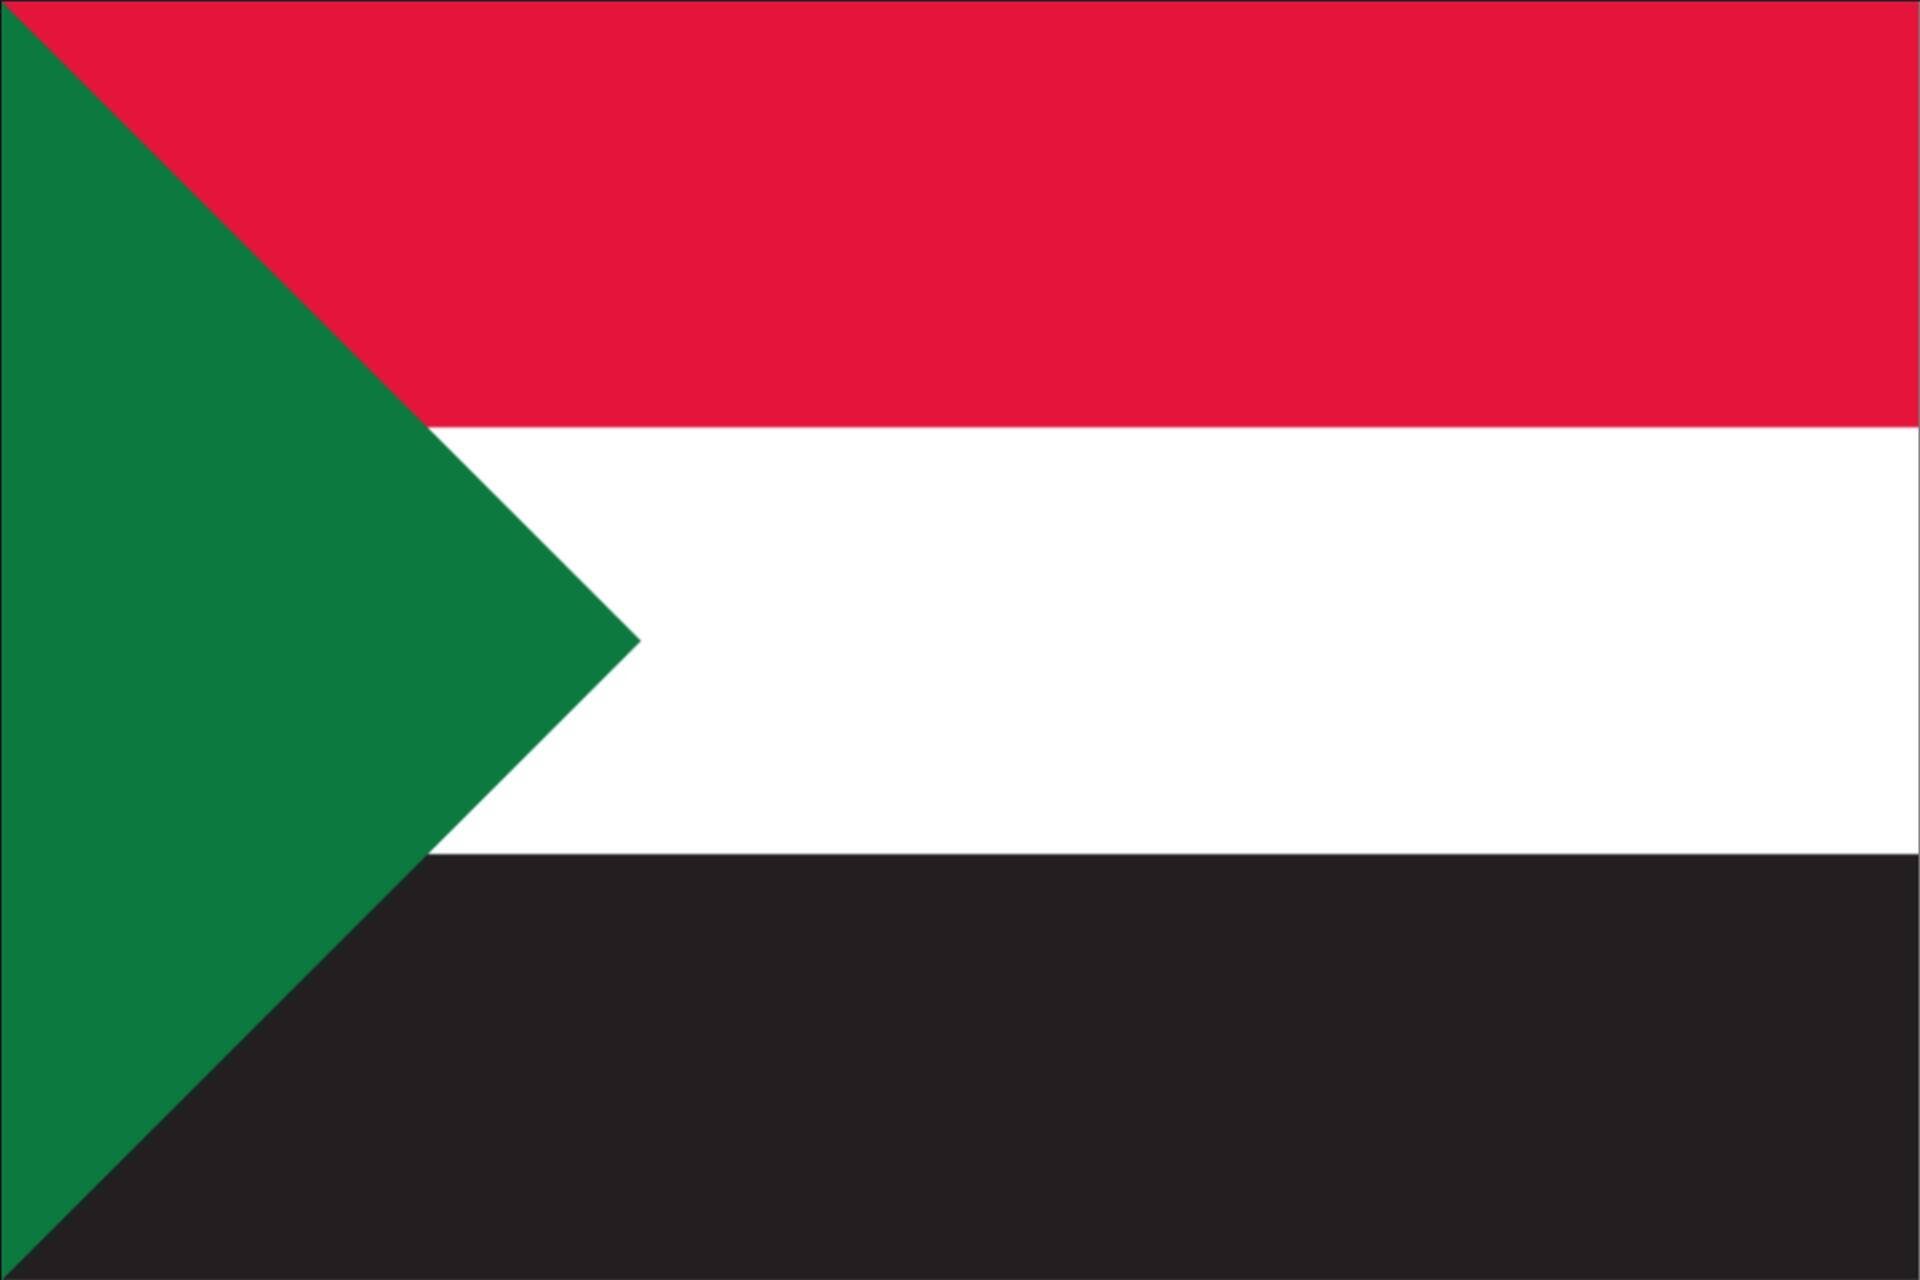 Querformat g/m² Sudan Flagge 110 Flagge flaggenmeer